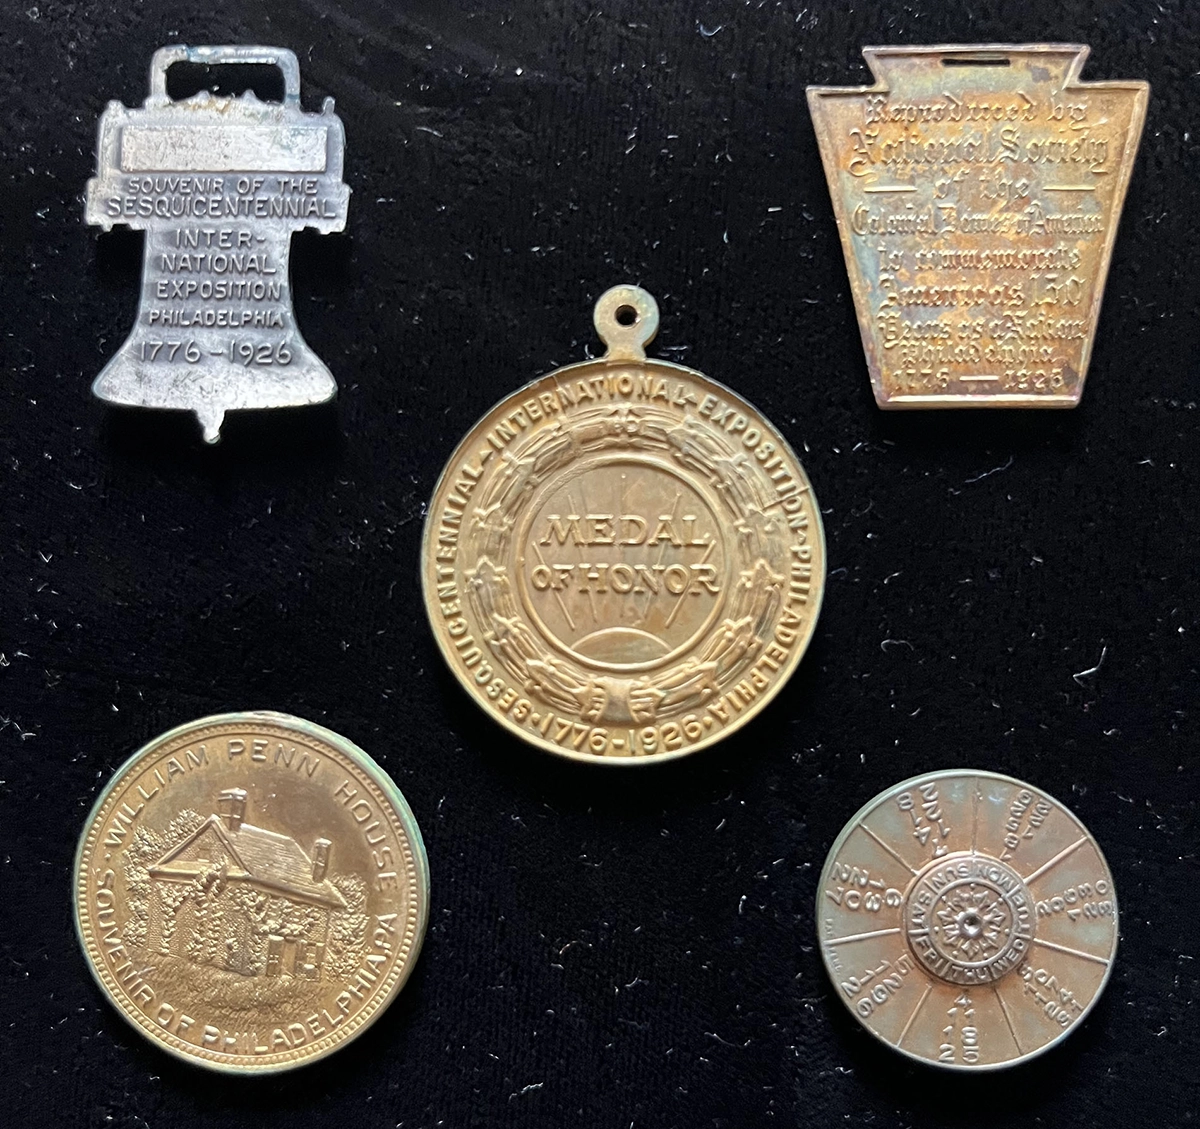 This is an image of an assortment of medals and pins issued to commemorate the 1926 Centennial. 